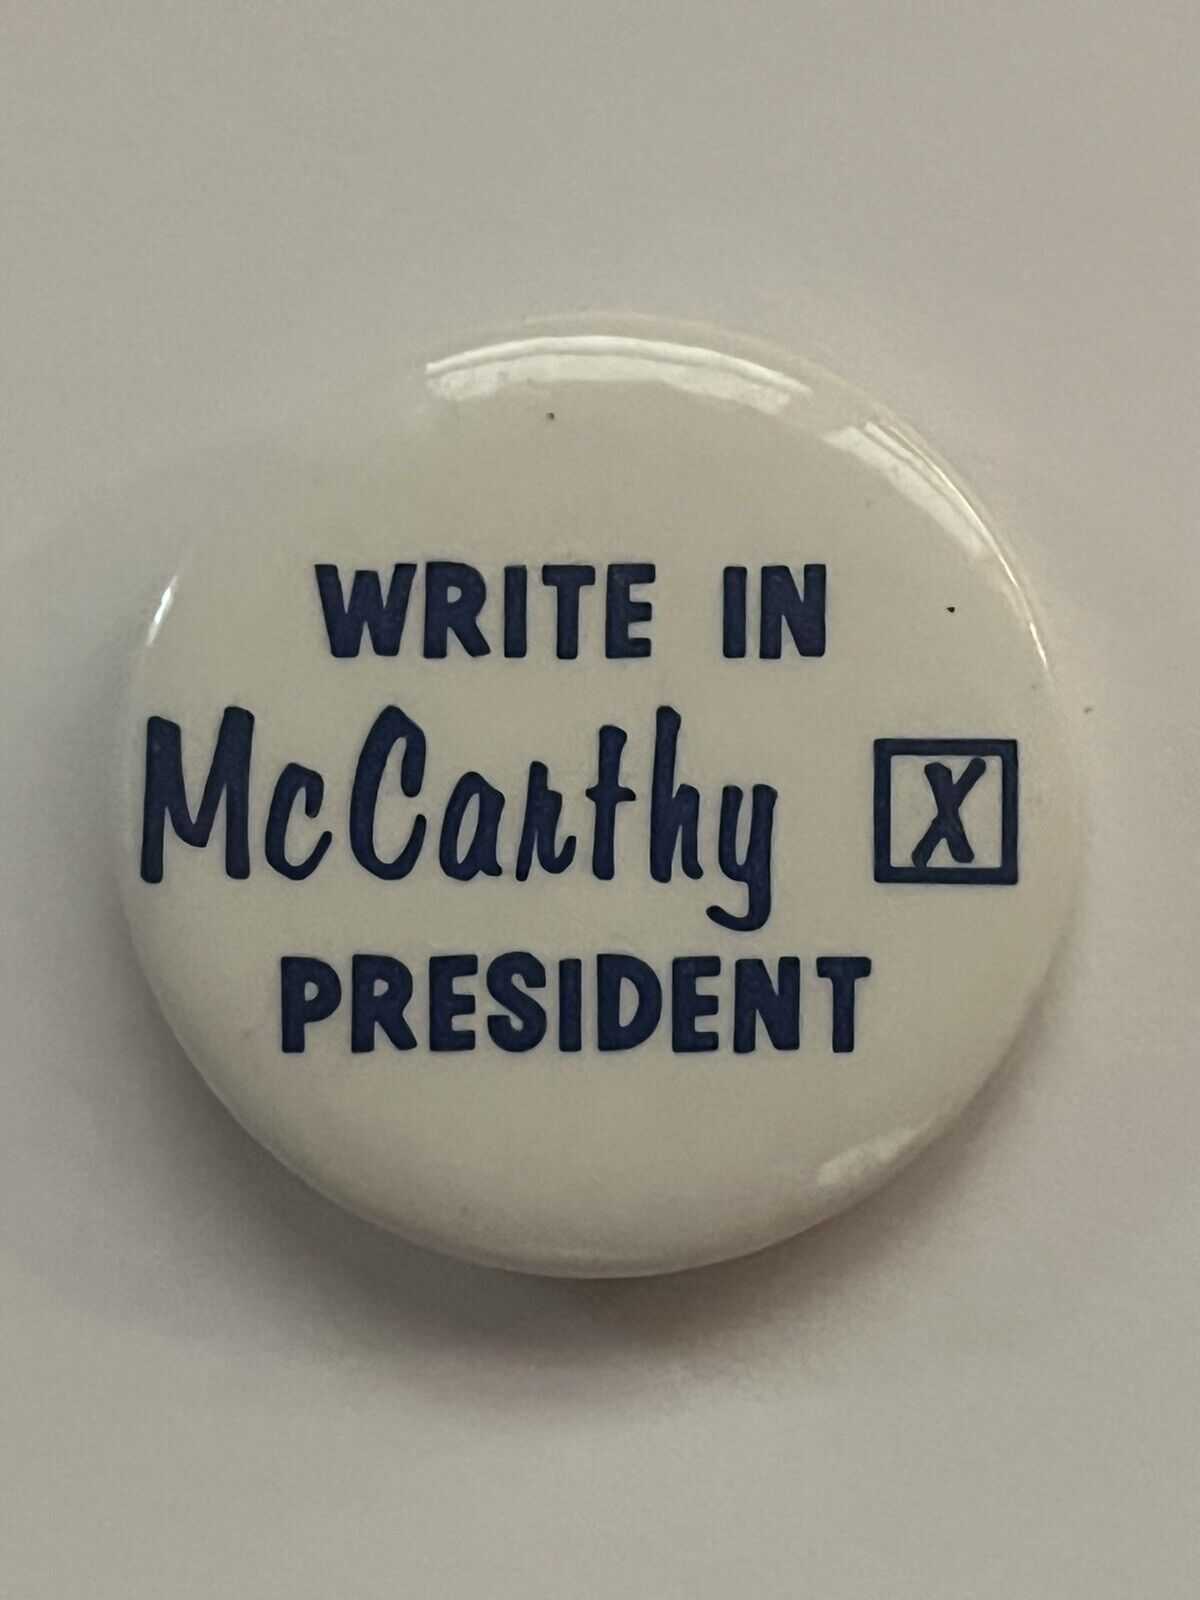 1968 Eugene McCarthy Presidential Campaign Button